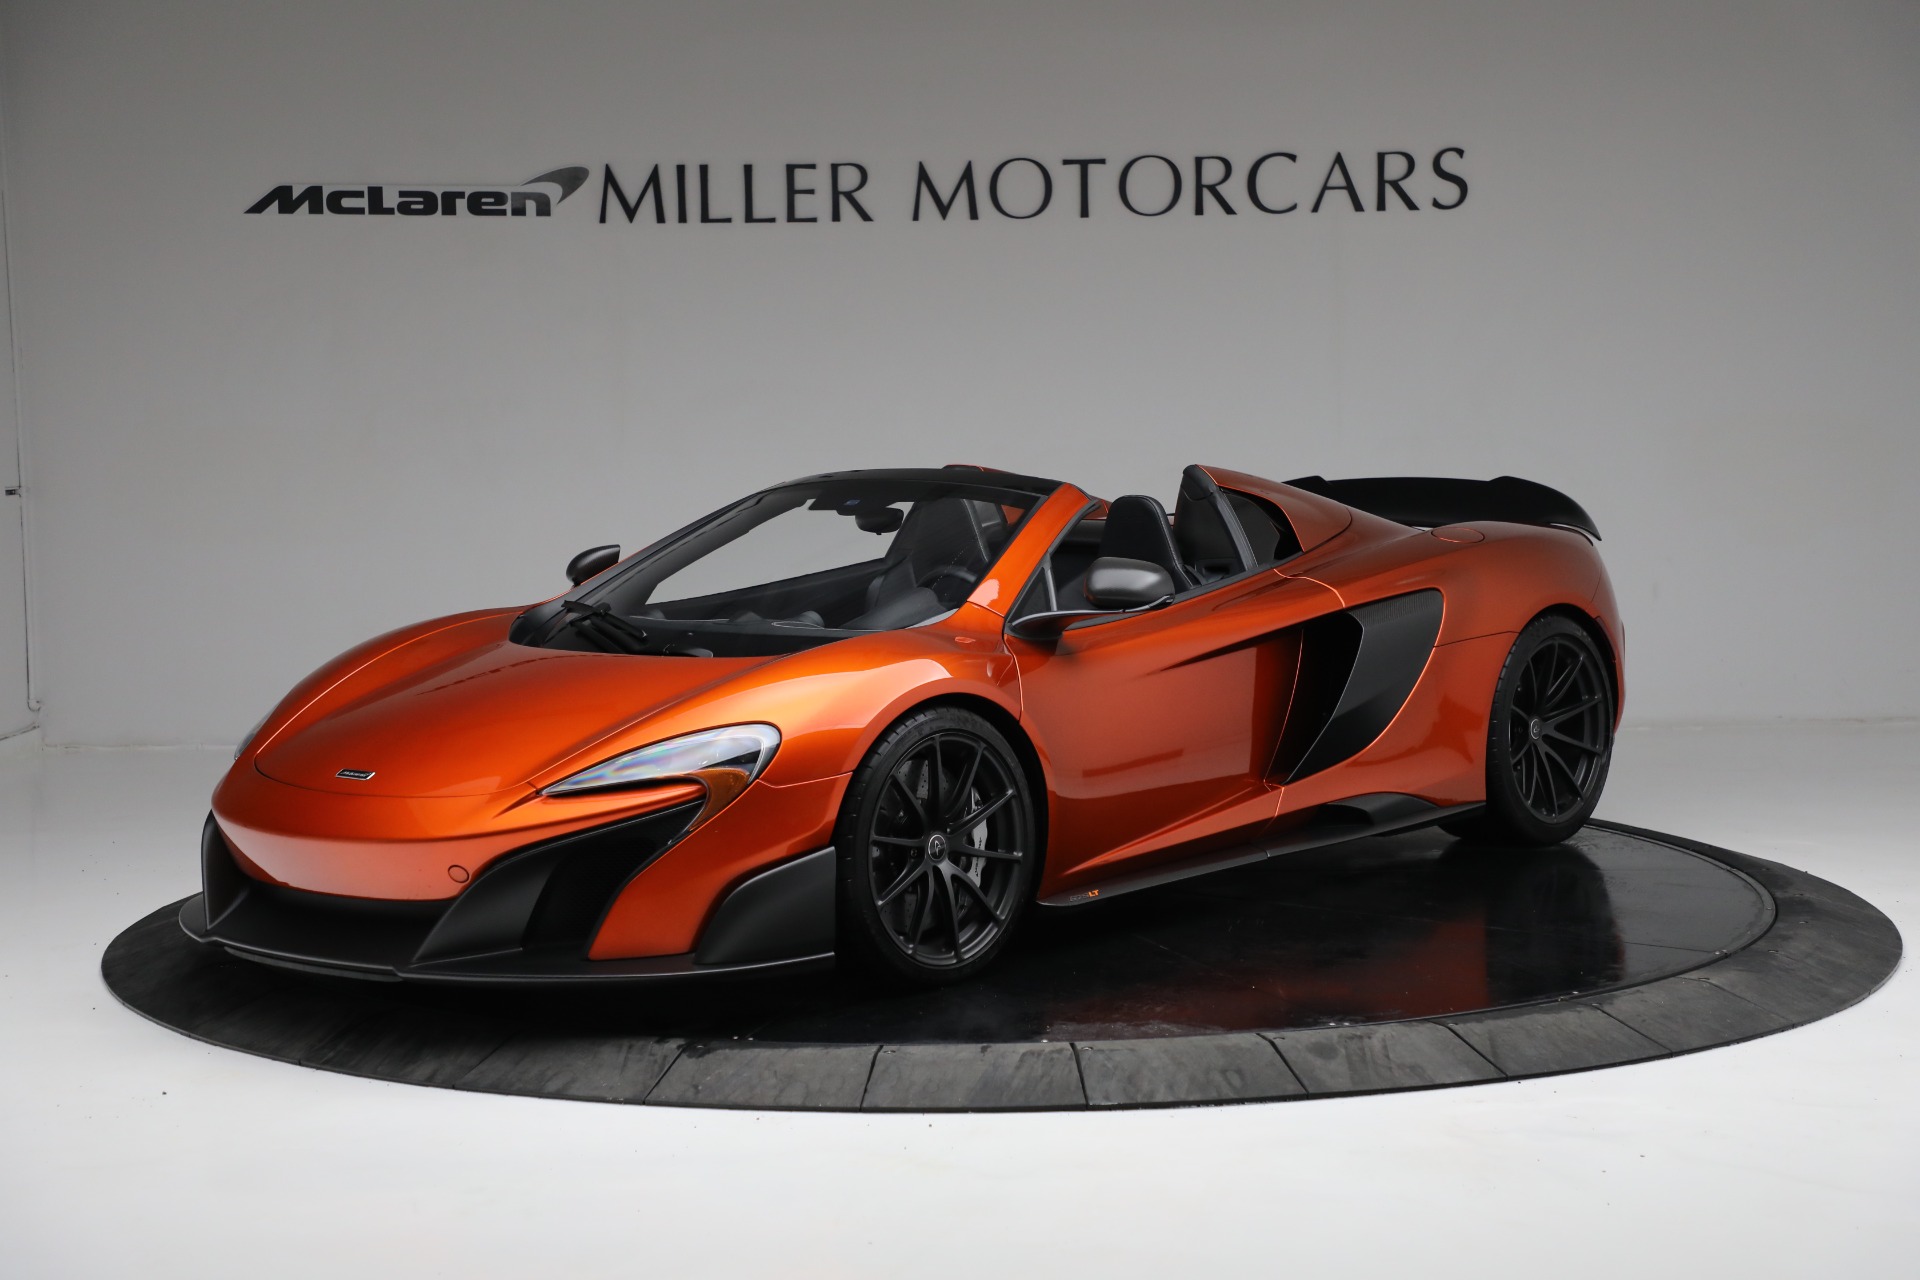 Used 2016 McLaren 675LT Spider for sale $280,900 at Bugatti of Greenwich in Greenwich CT 06830 1